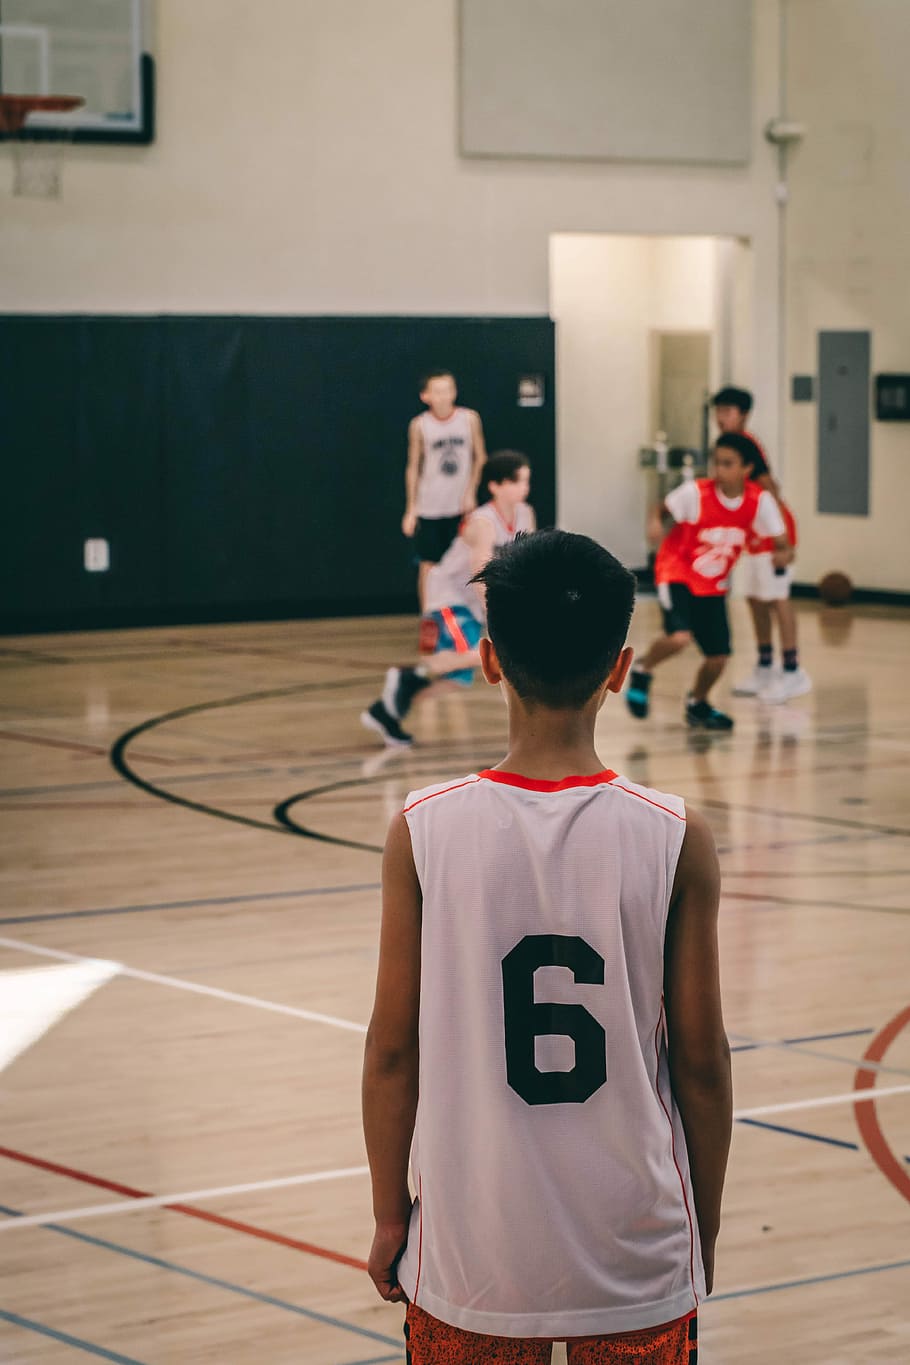 focus photo of a man wearing white and red 6 jersey shirt, boy in jersey shirt facing boy's playing basketball inside court, HD wallpaper